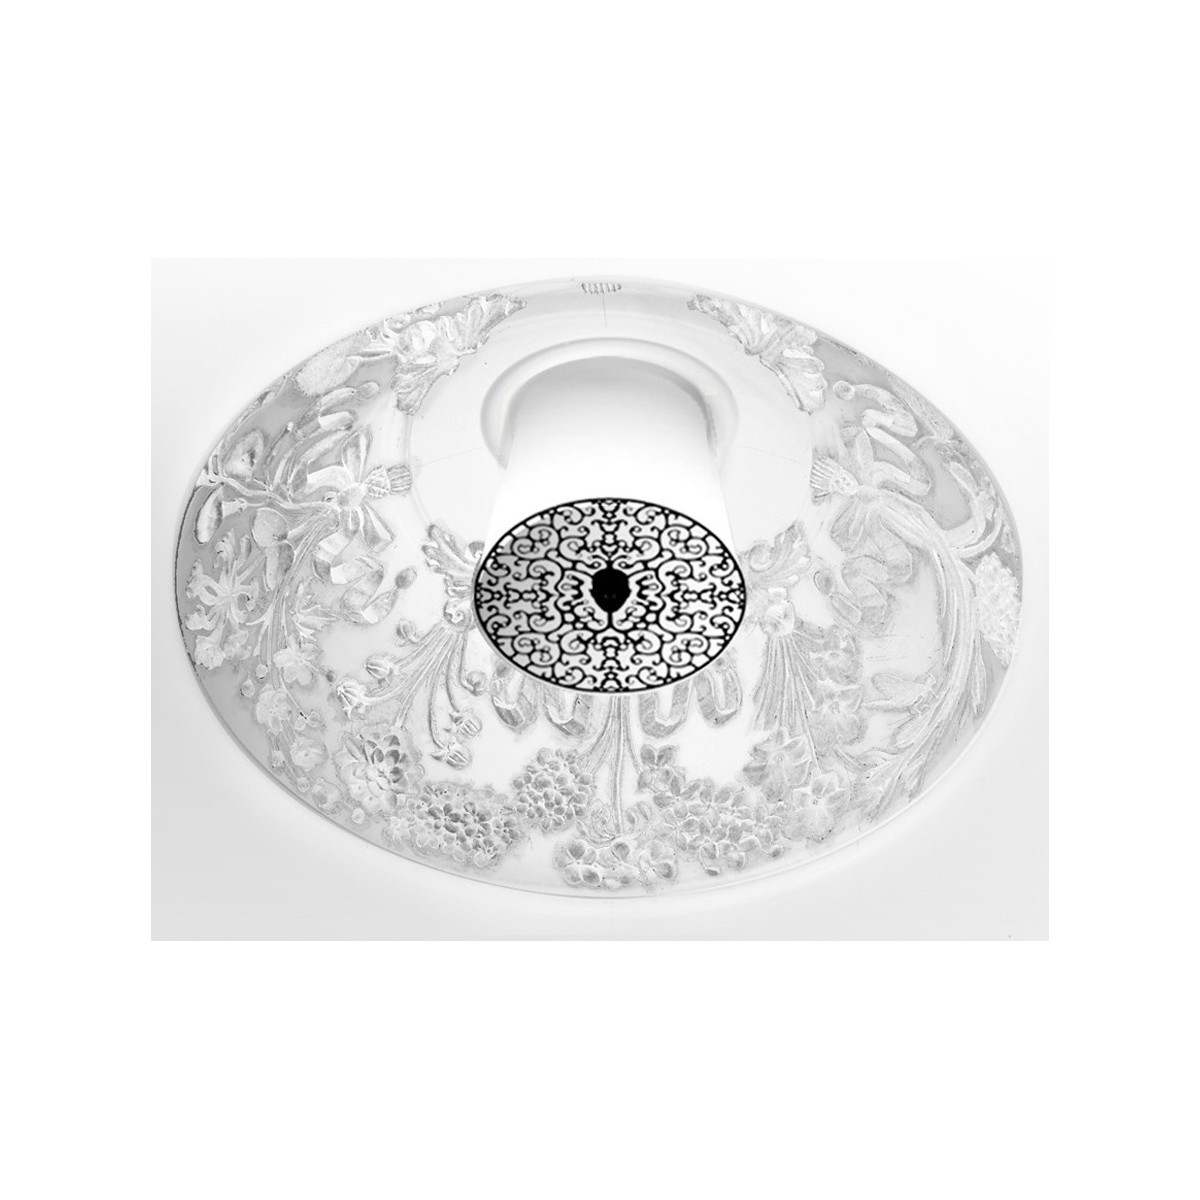 recessed ceiling/wall light - Skygarden